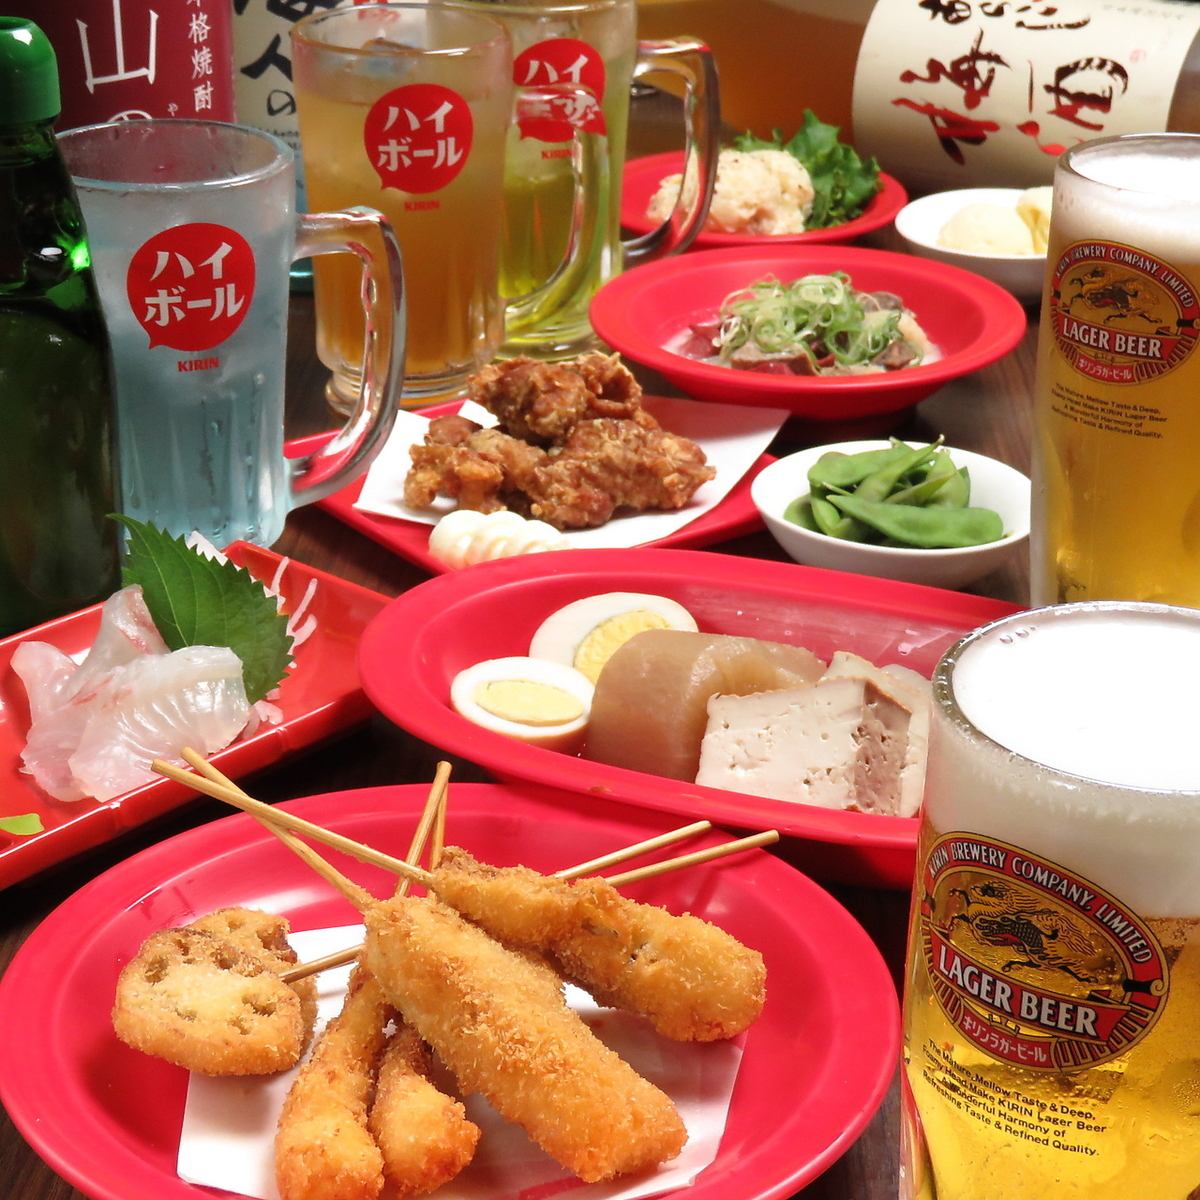 Full of specialties★Kushikatsu etc. (8 items) 90 minute all-you-can-drink course starting from 3500 yen excluding tax★